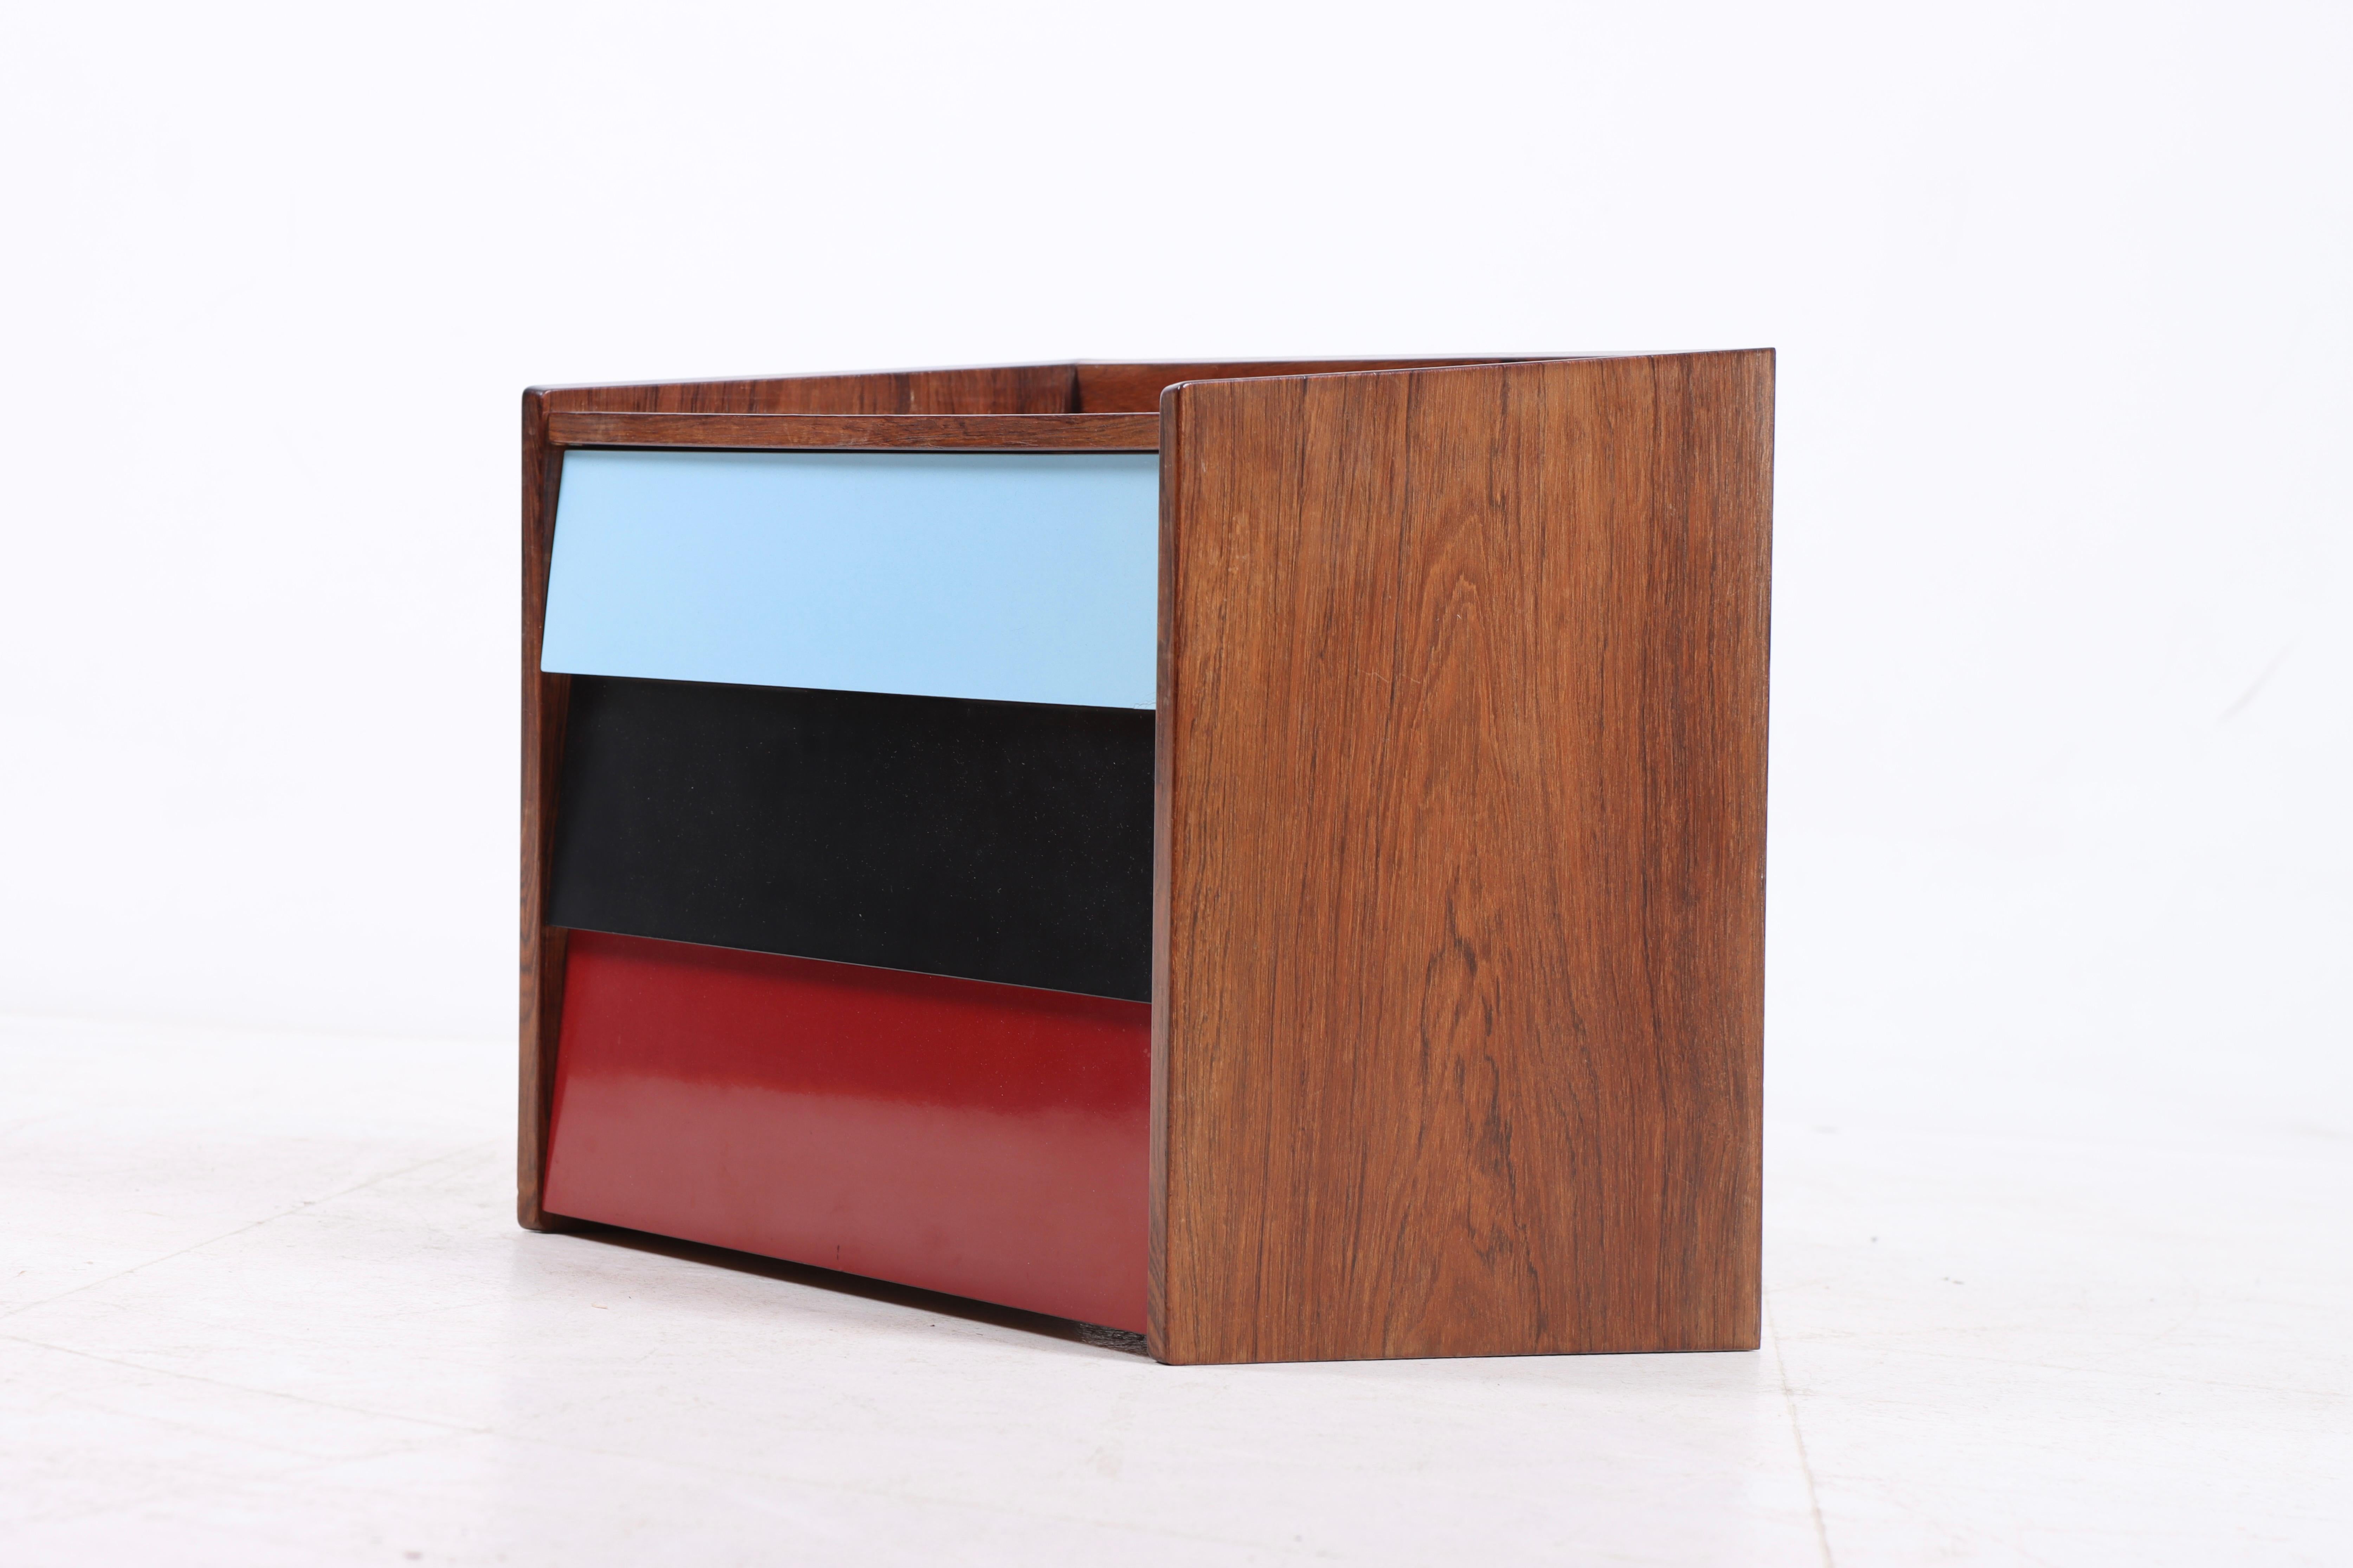 Midcentury wall mounted commode in rosewood with formica, designed and made in Denmark, 1960s.